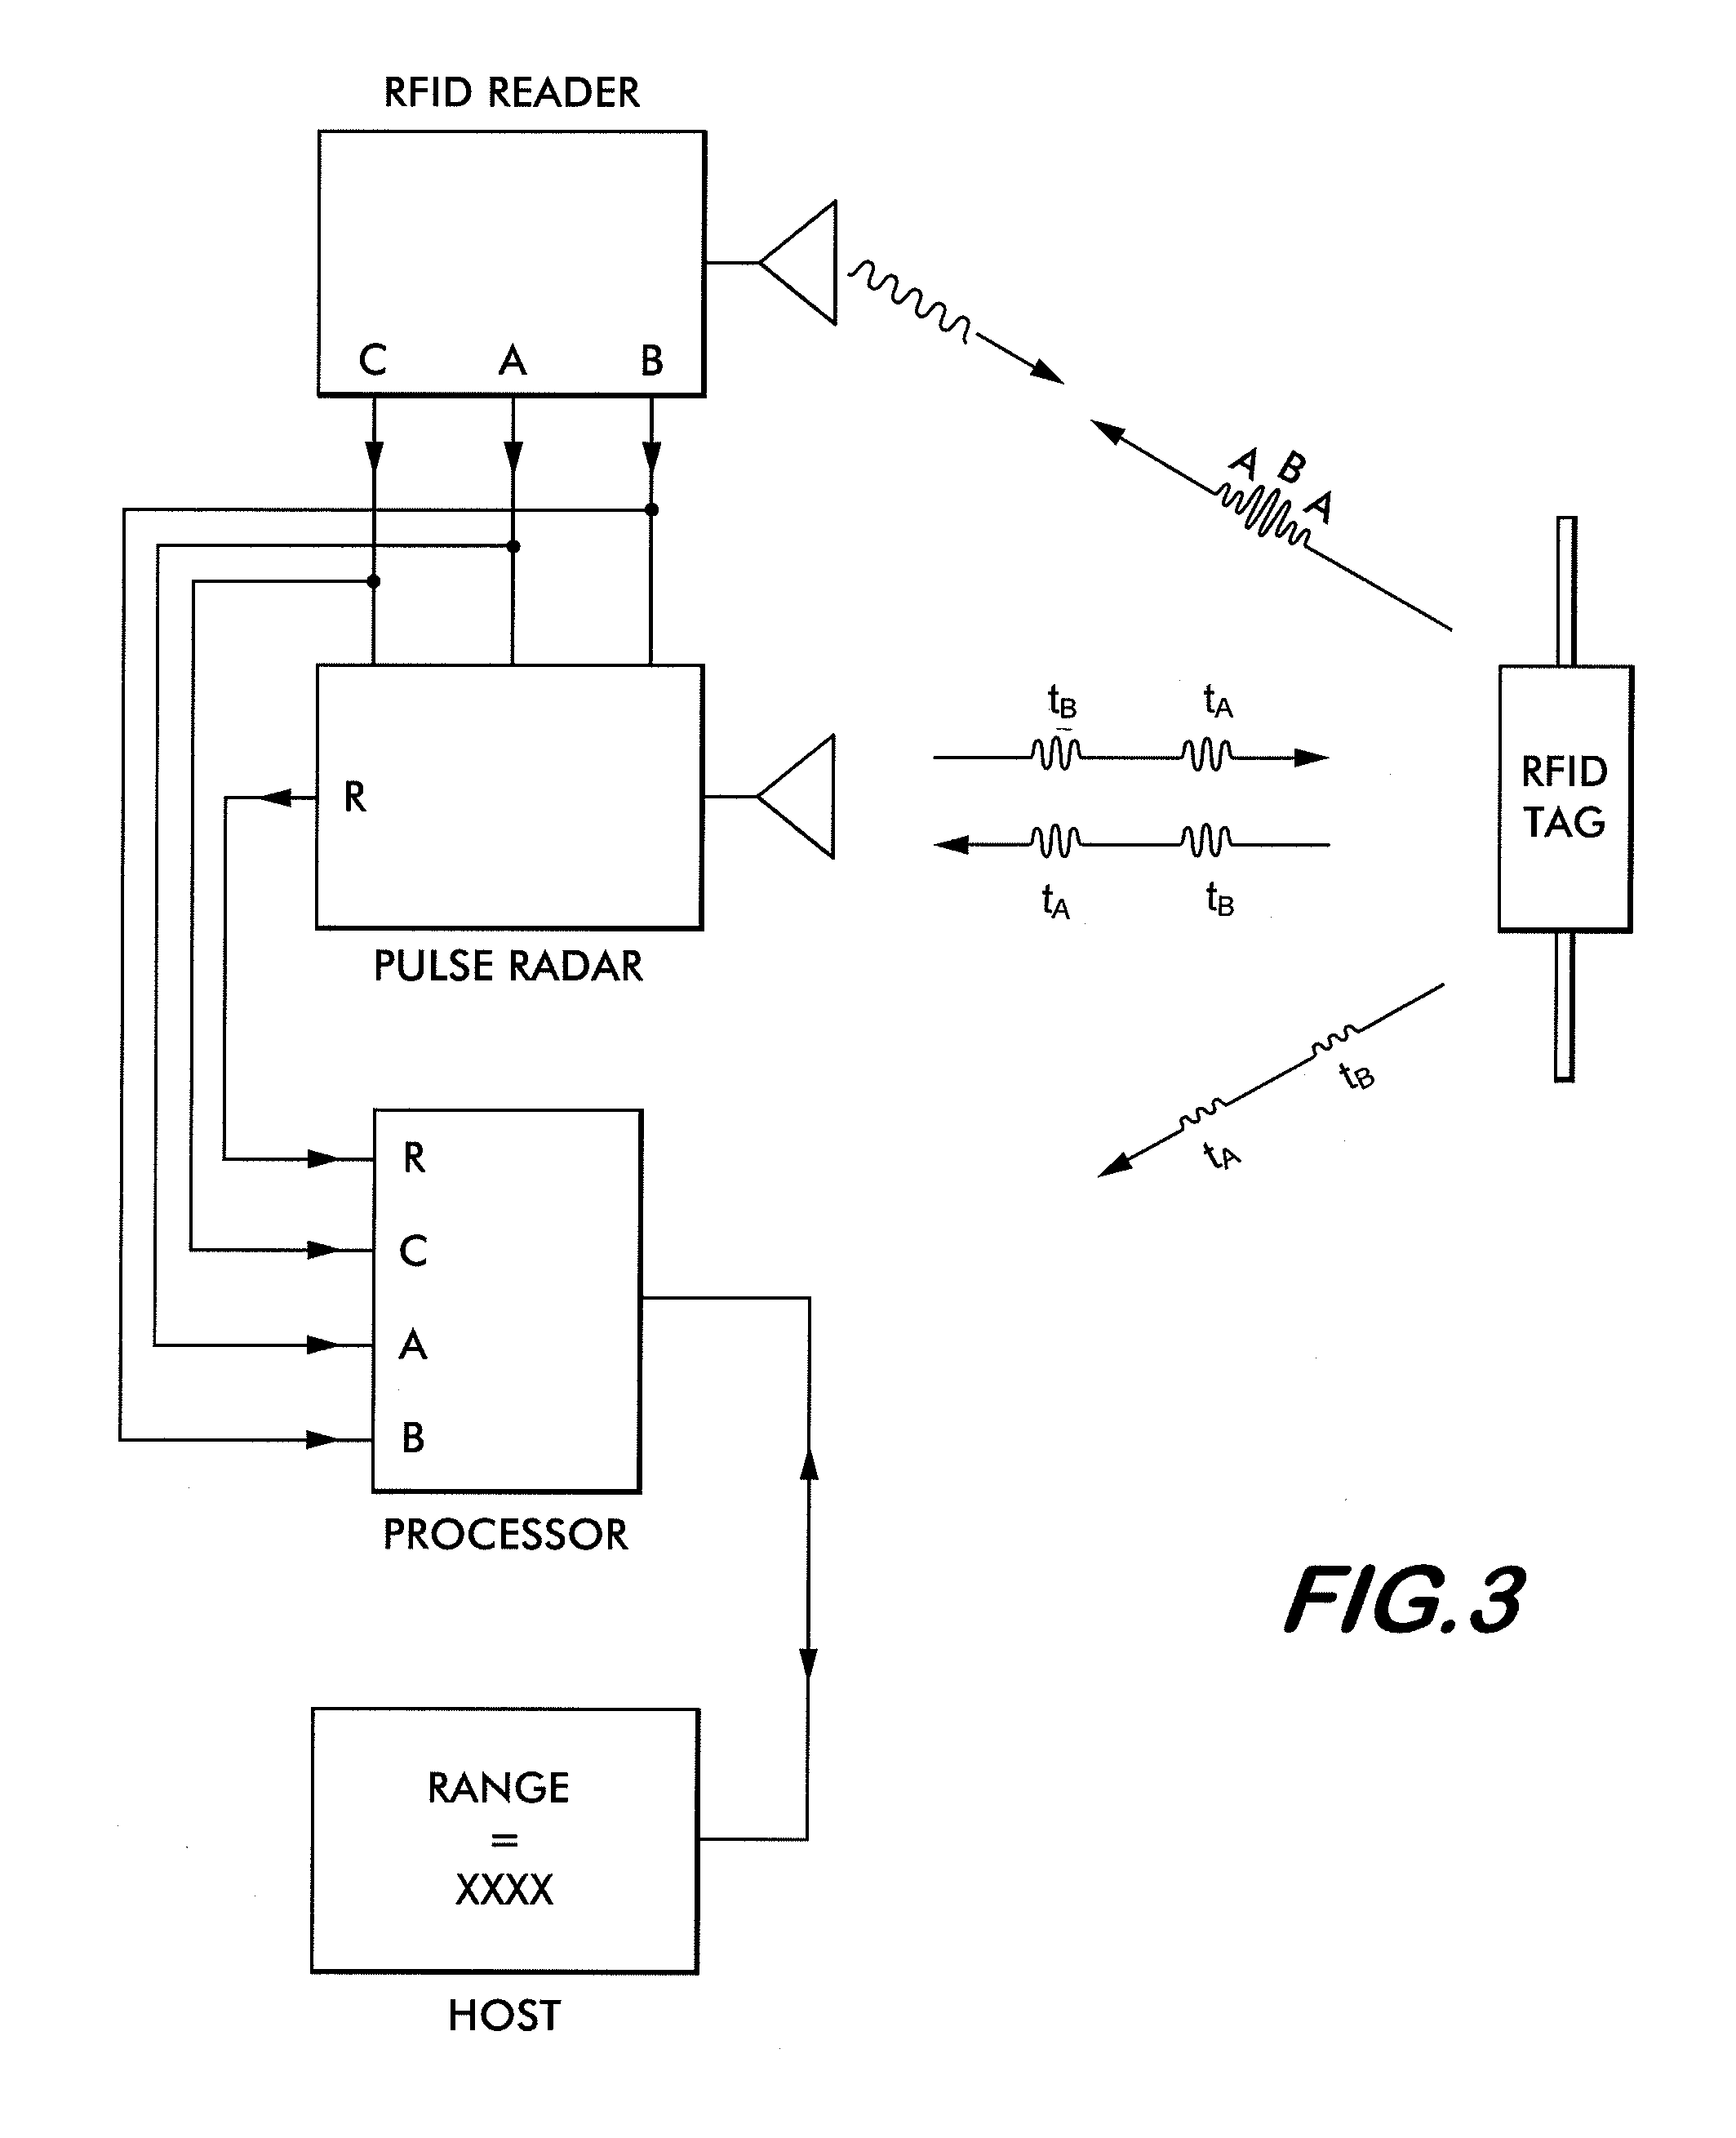 System and method for microwave ranging to a target in presence of clutter and multi-path effects